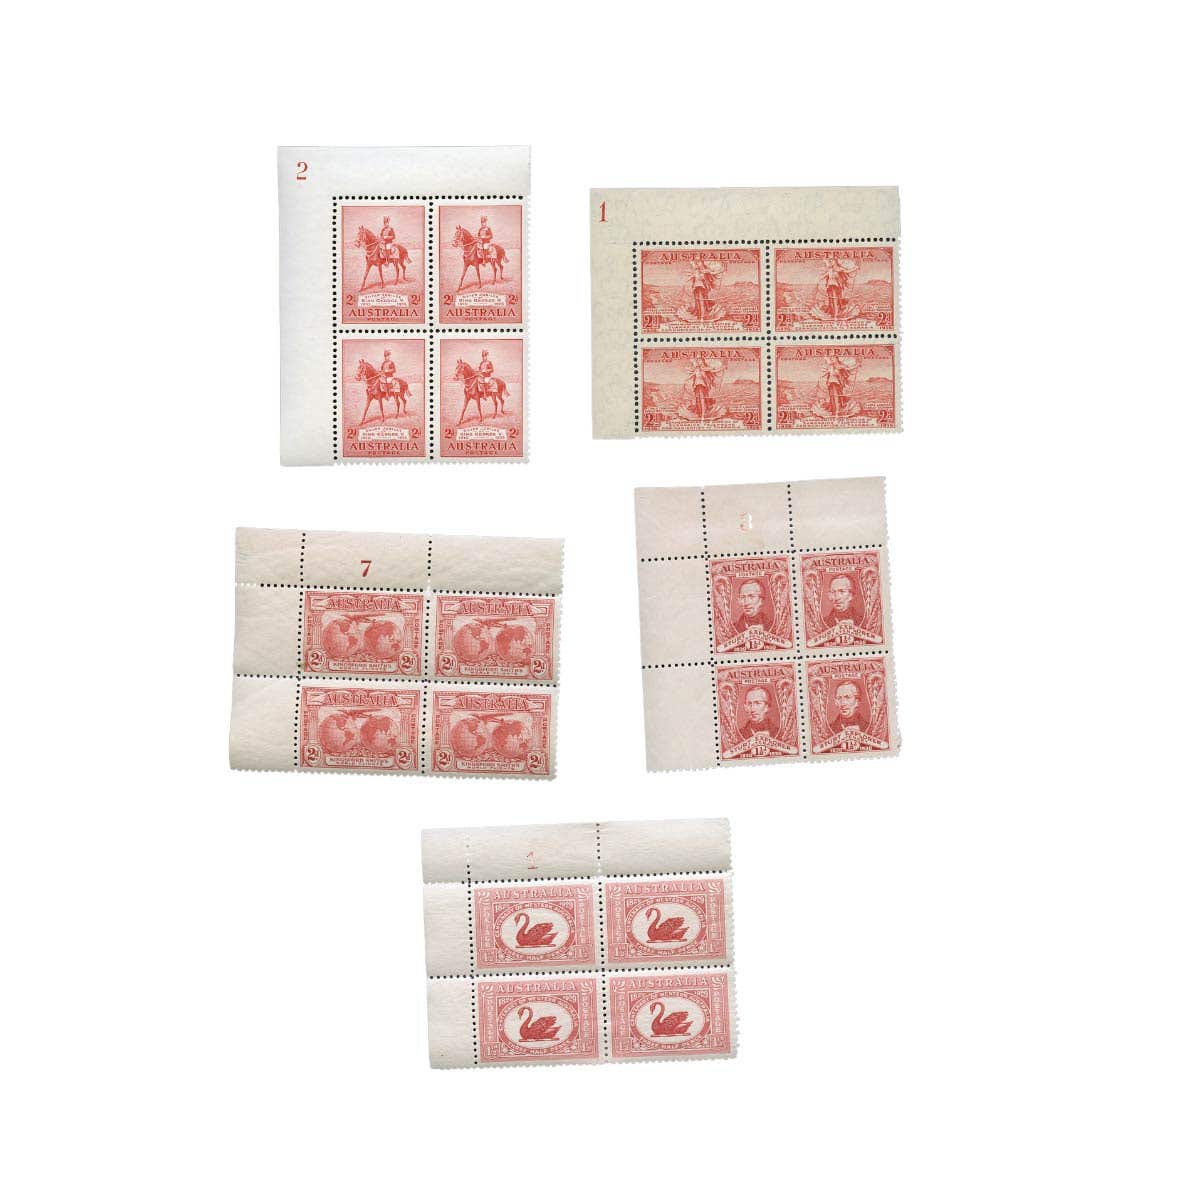 1929-35 1½d & 2d Commemorative Plate Blocks of Four Set of 5 Different MUH